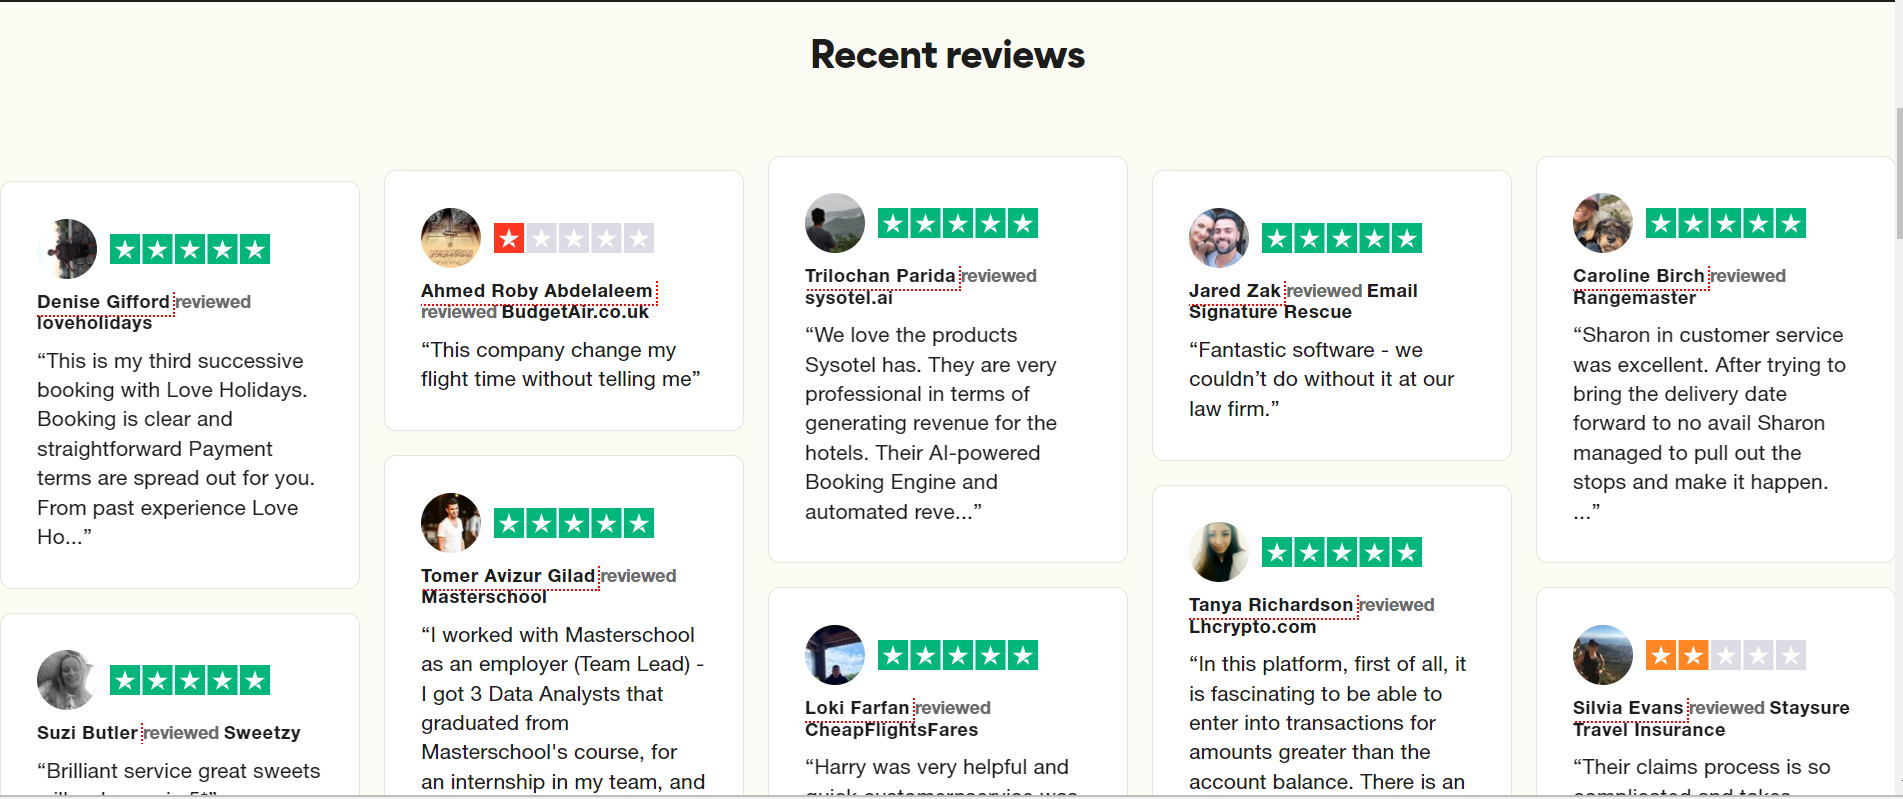 How to get reviews on Trustpilot